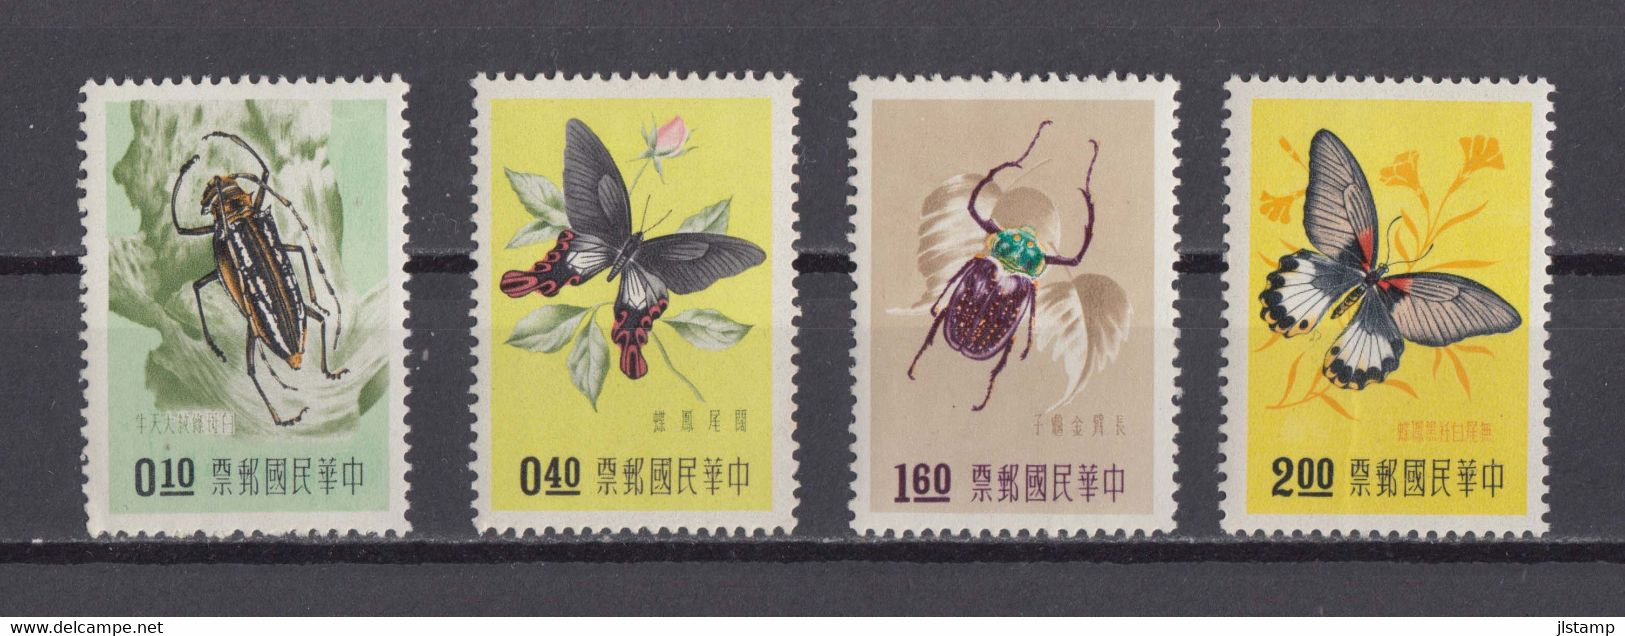 China Taiwan 1958 Insect And Butterfly Stamps 4v,Scott# 1183-1188,OG,MNH,VF - Ongebruikt